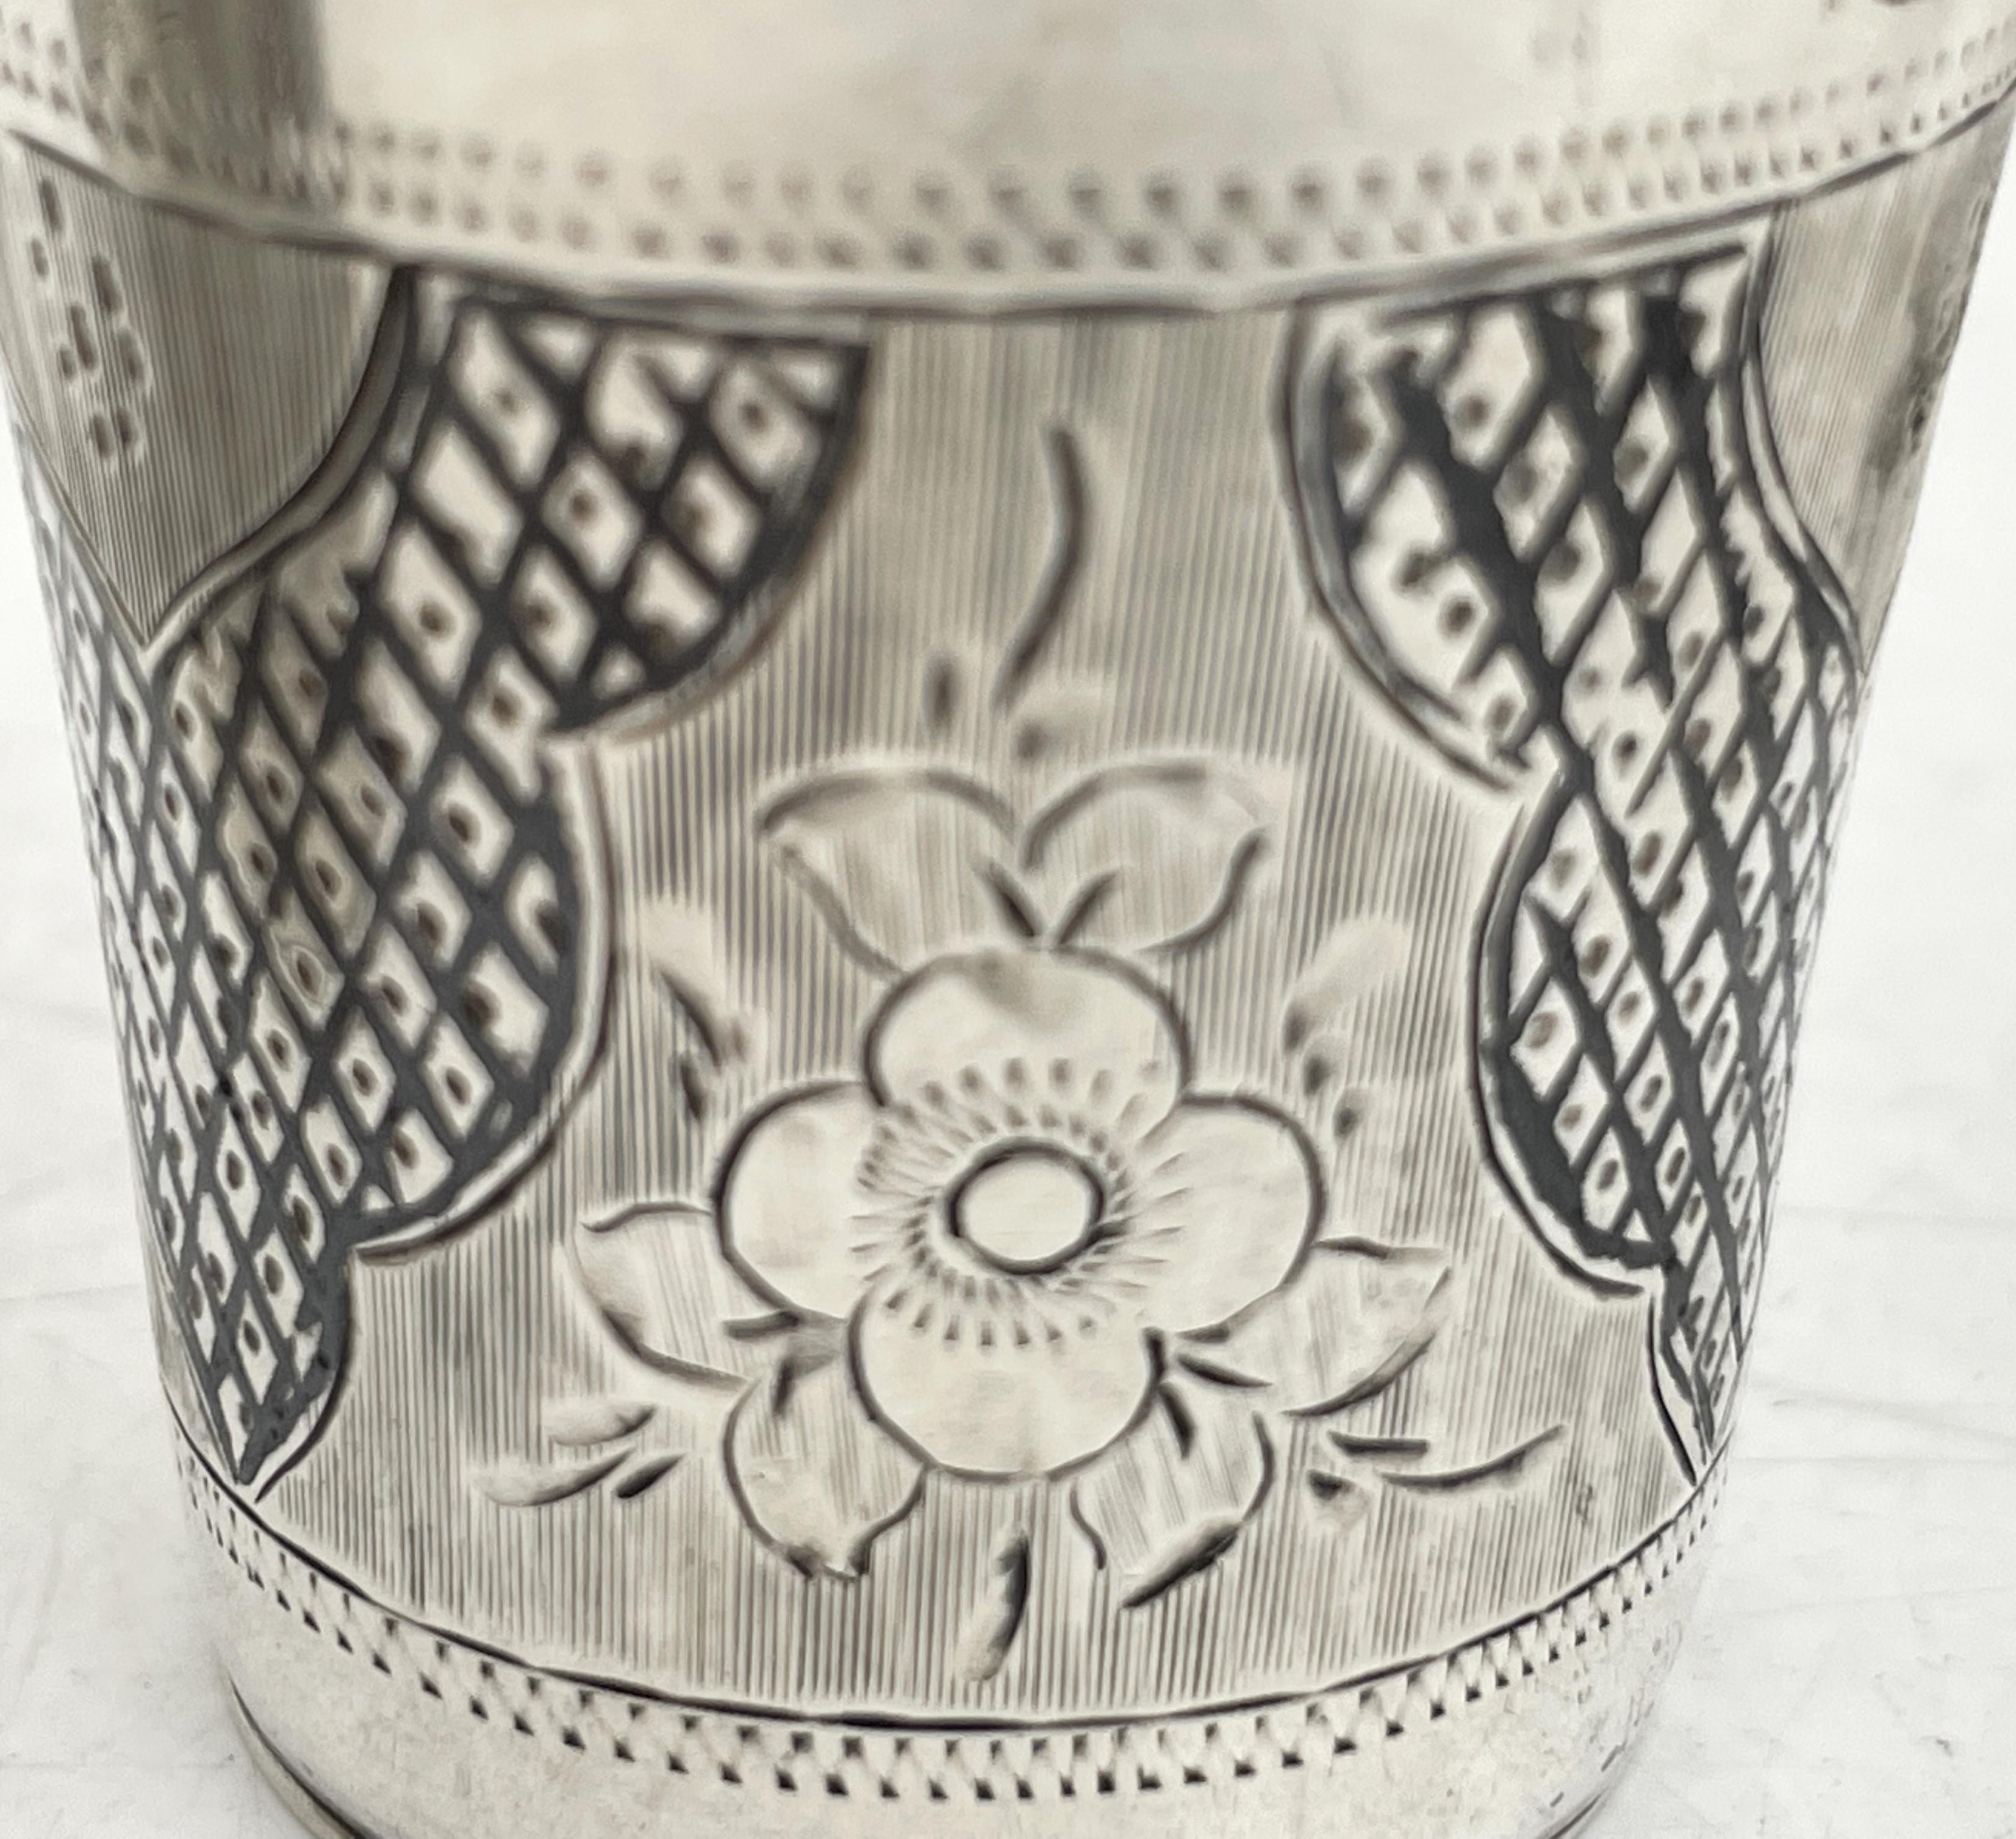 Pair of Russian 0.84 silver Kiddush cups with niello inlays from 1870, showcasing stylized floral and geometric motifs. They measure 1 7/8'' in height by 1 3/4'' in diameter at the top and bear hallmarks as shown. 

Please feel free to ask us any